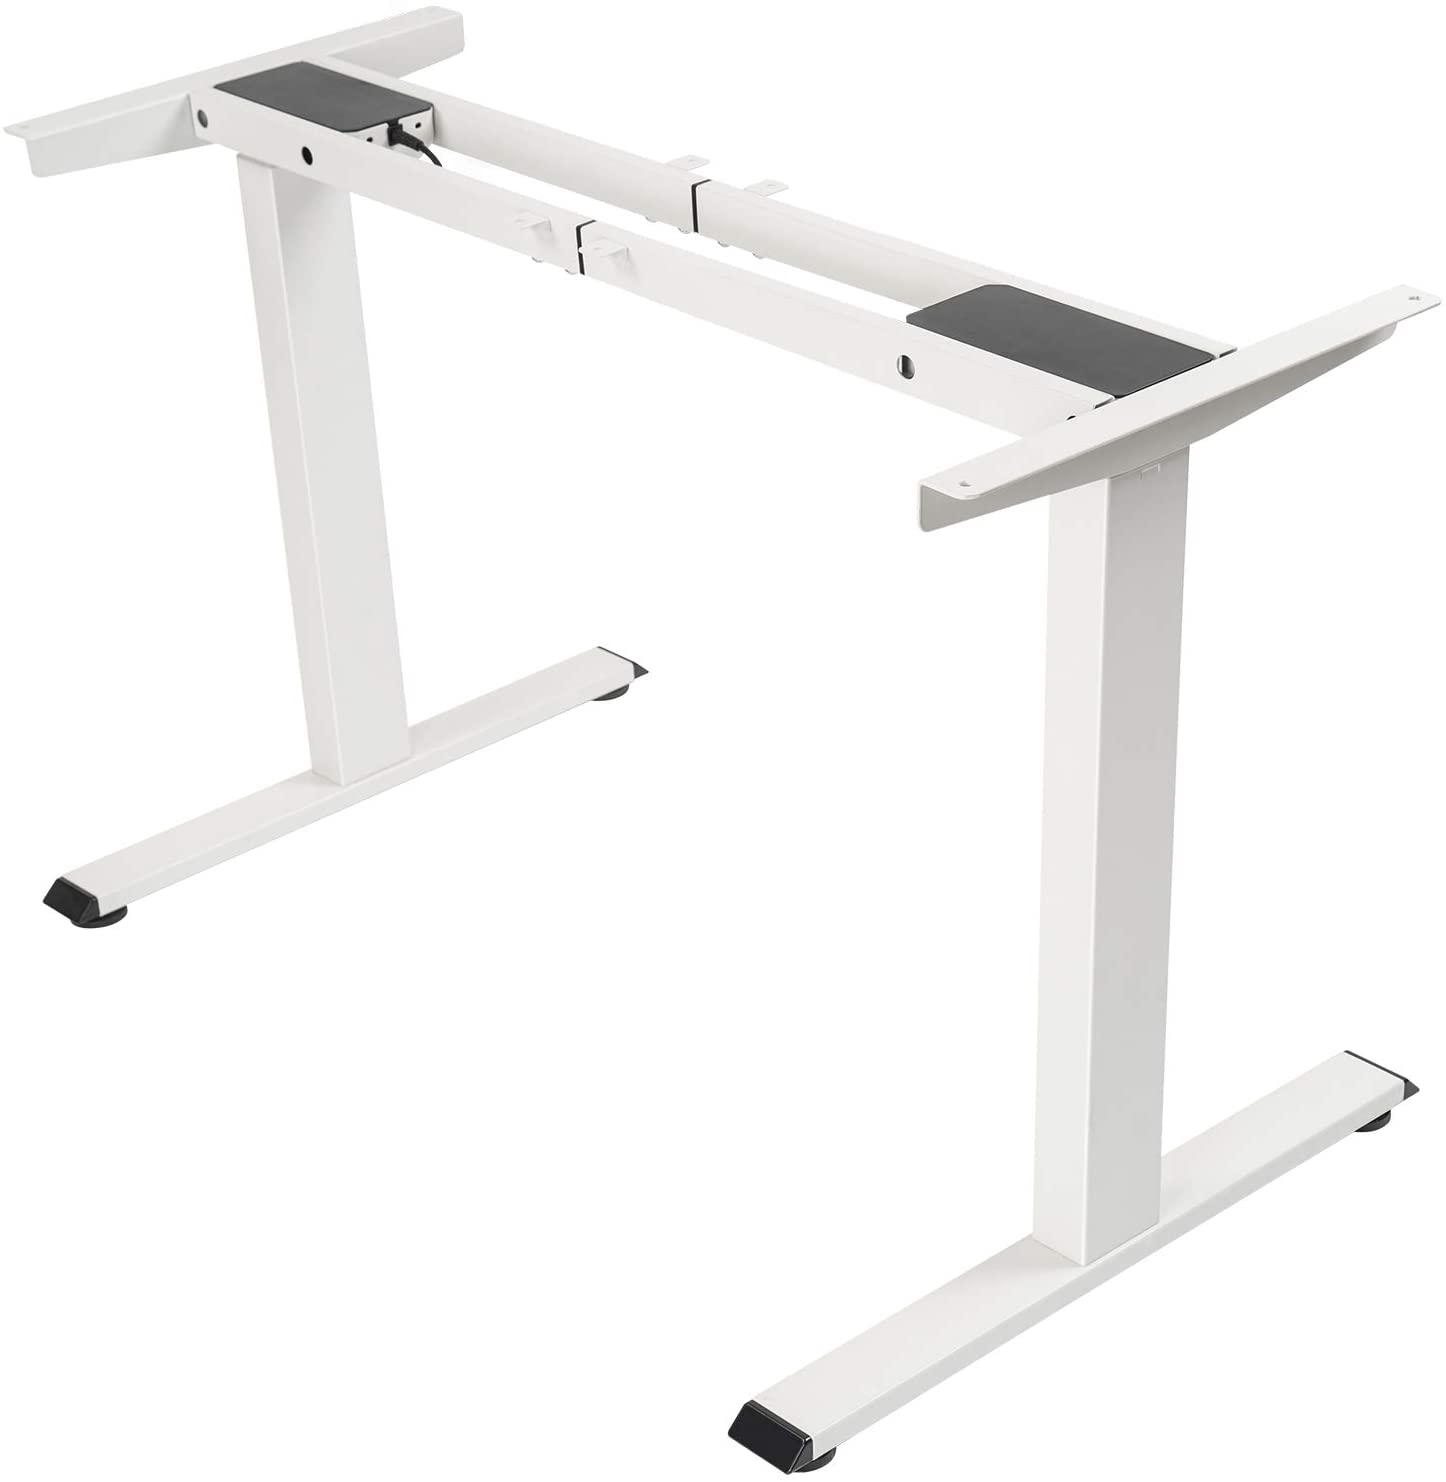 Electric Stand up Desk Frame - FEZIBO Dual Motor and Cable Management Rack Height Adjustable Sit Stand Standing Desk Base Workstation, White (Frame Only)